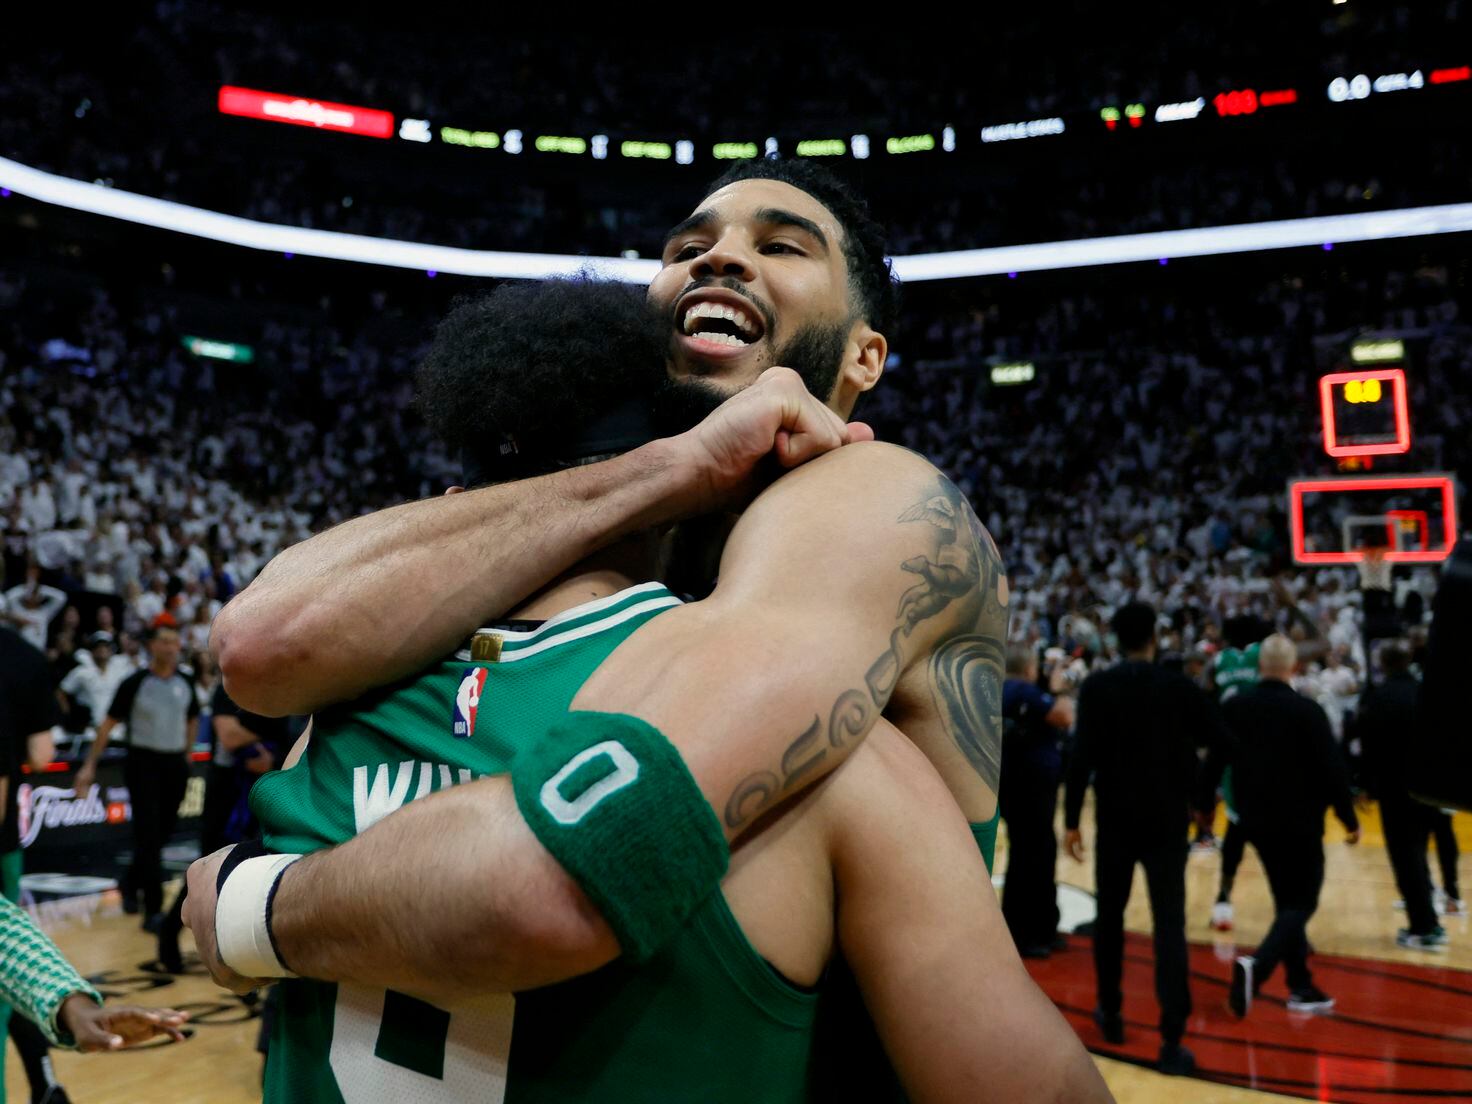 Instant analysis: Group effort, led by Jayson Tatum's 27 points